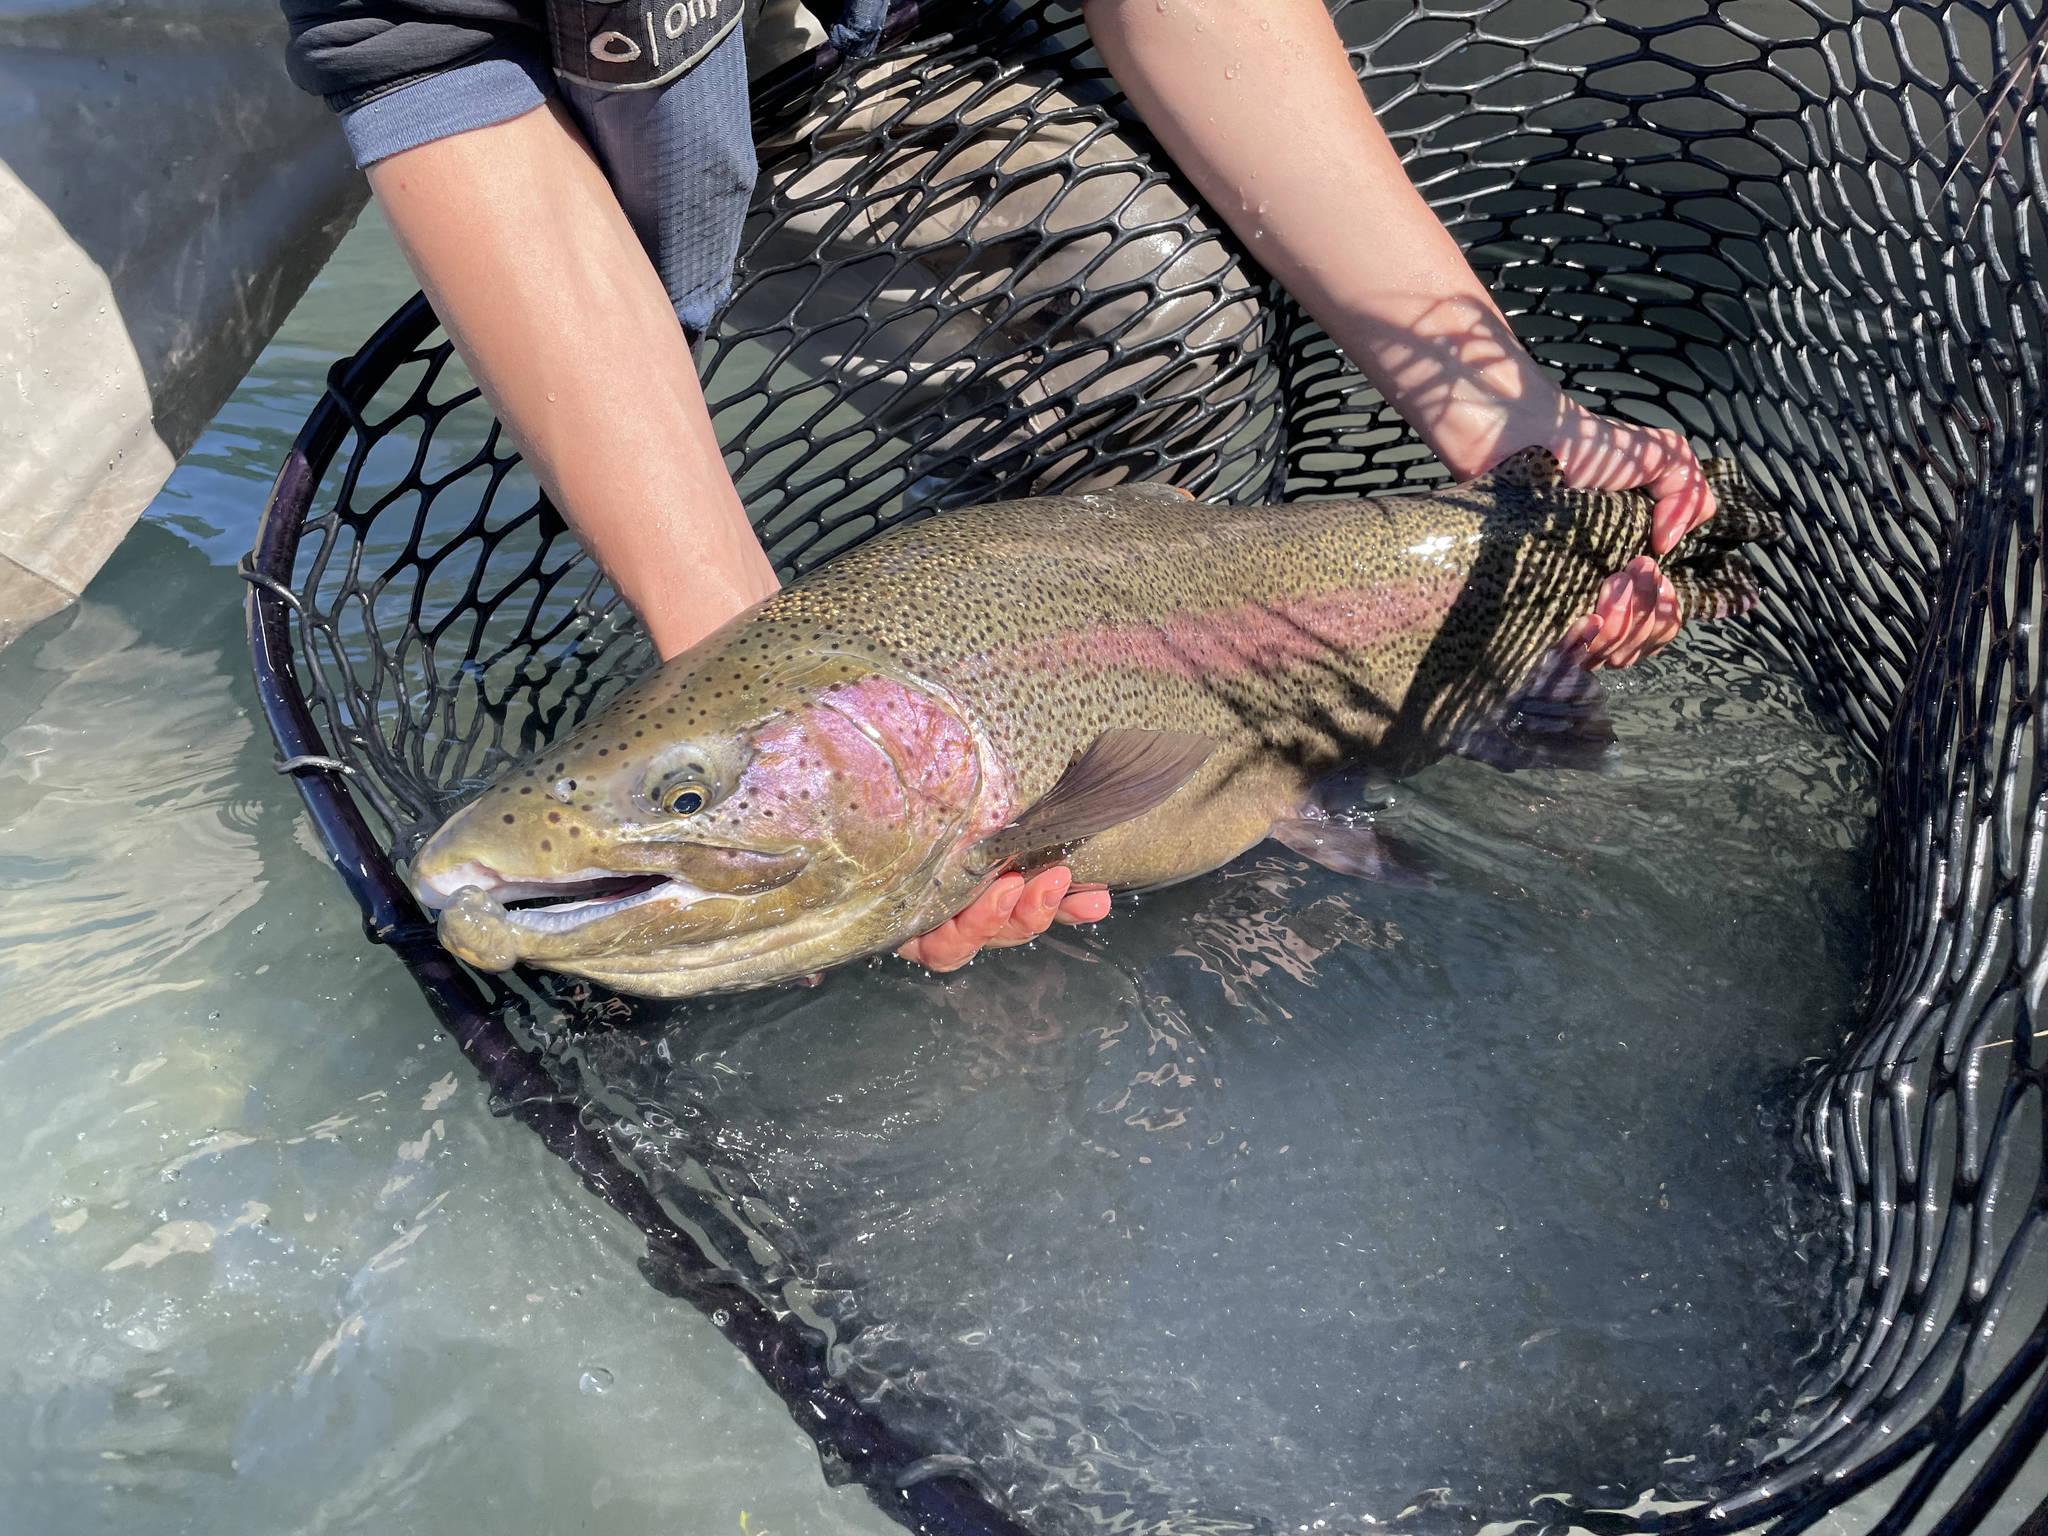 The author's wife releases a Kenai River rainbow trout during the first day of their honeymoon on the Kenai Peninsula. (Jeff Lund / For the Juneau Empire)